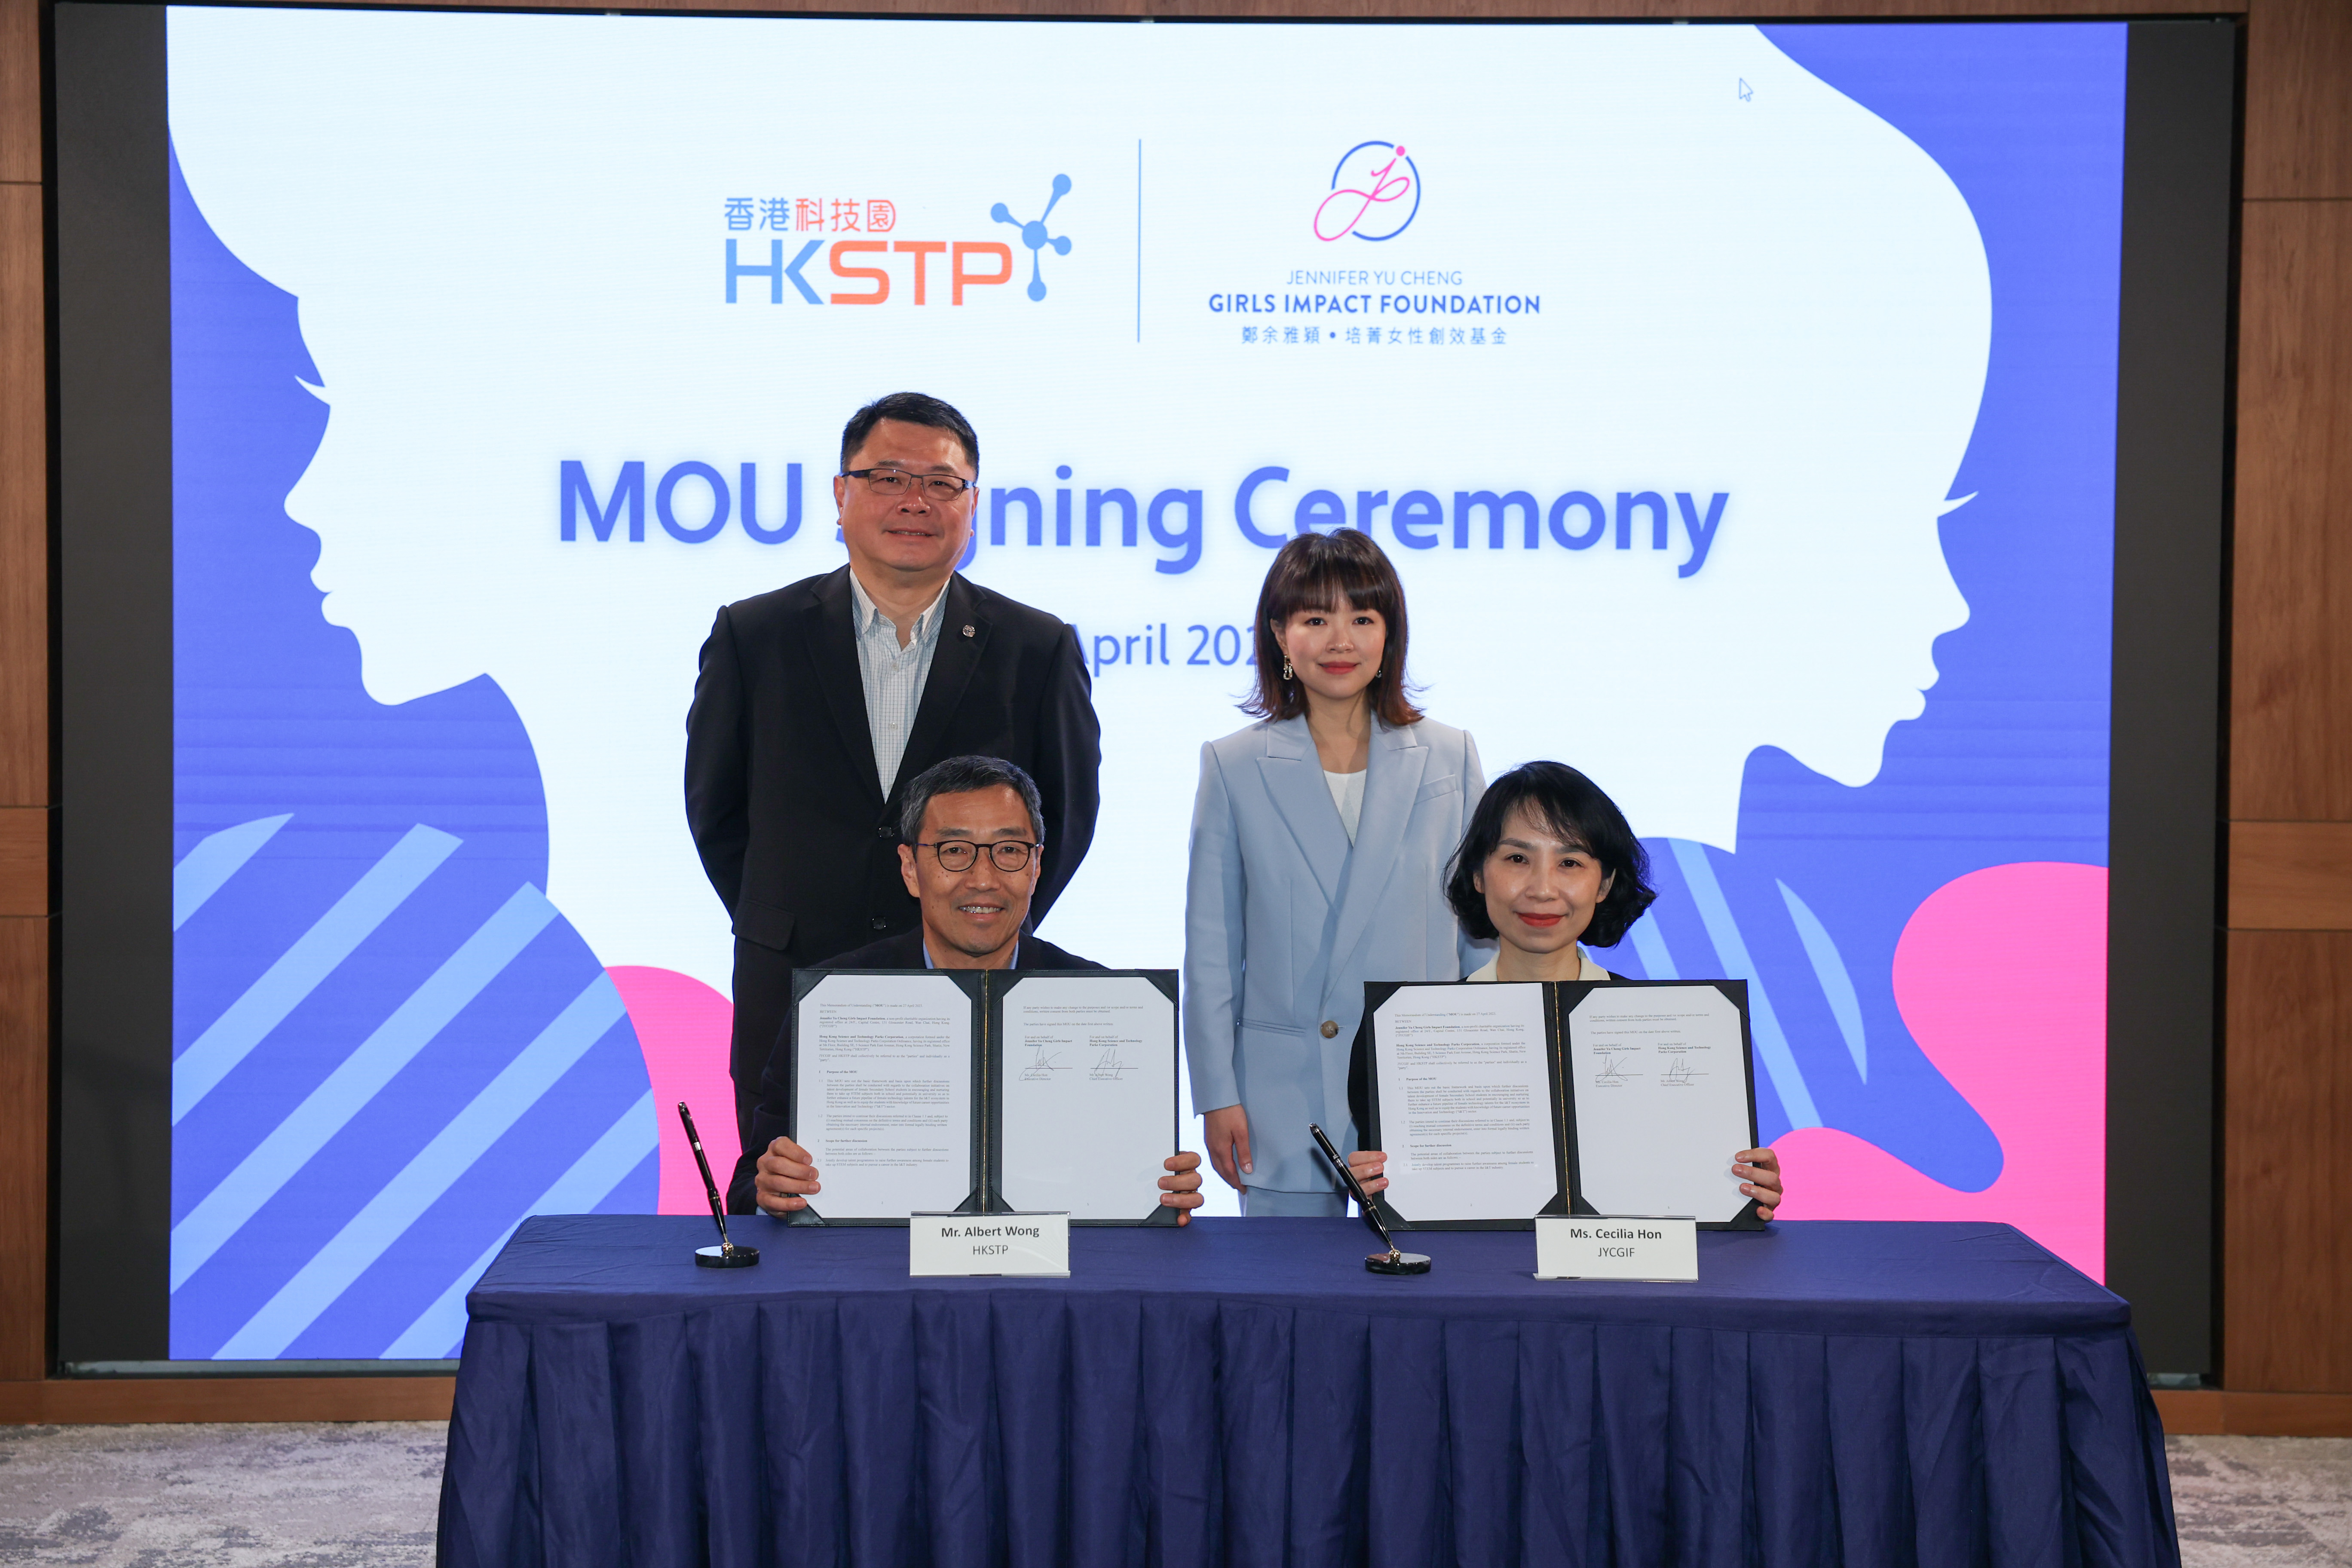 Witnessed by Dr Sunny Chai, Chairman of HKSTP (back row, left) and Mrs Jennifer Yu Cheng, Founder of JYCGIF (back row, right), Mr Albert Wong, CEO of HKSTP (front row, left) and Ms Cecilia Hon, Executive Director of JYCGIF (front row, right) signed the MoU to strengthen talent development and attract more female students to join Hong Kong